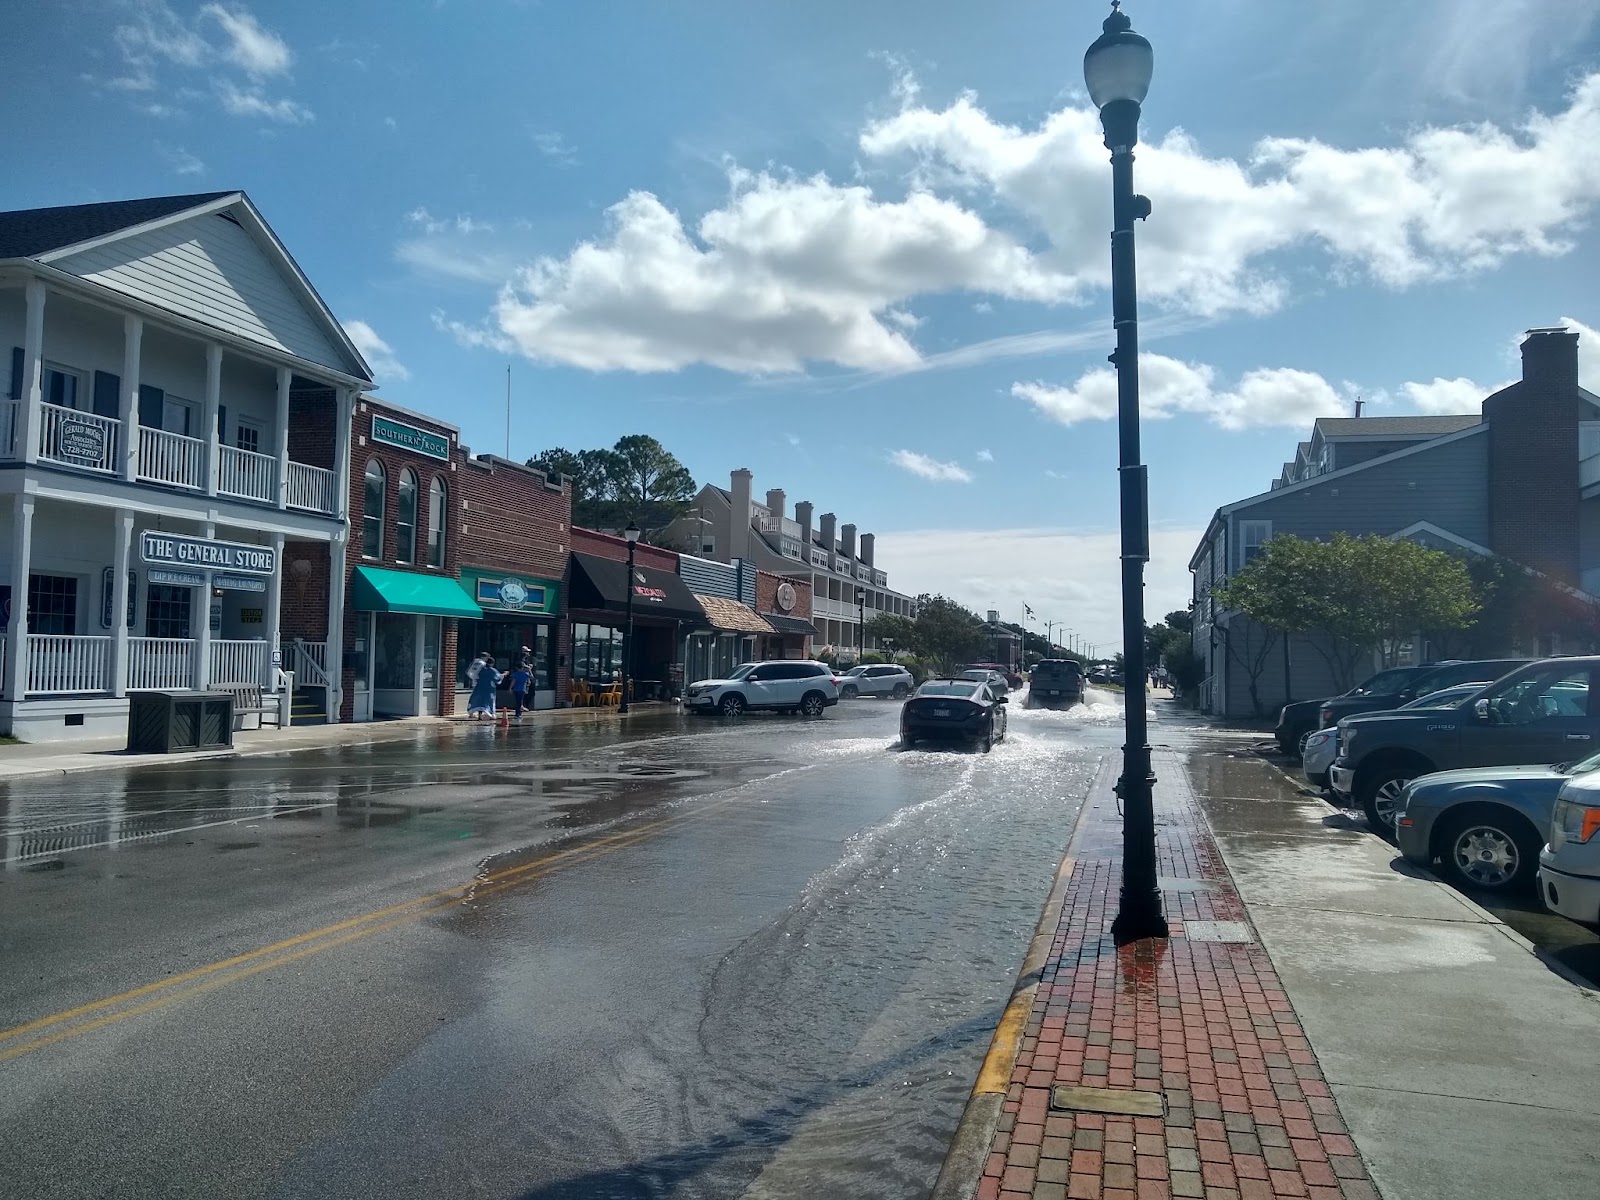 An urban street is partly flooded with saltwater from a high tide flood. Cars are parked in and driving through the floodwaters.